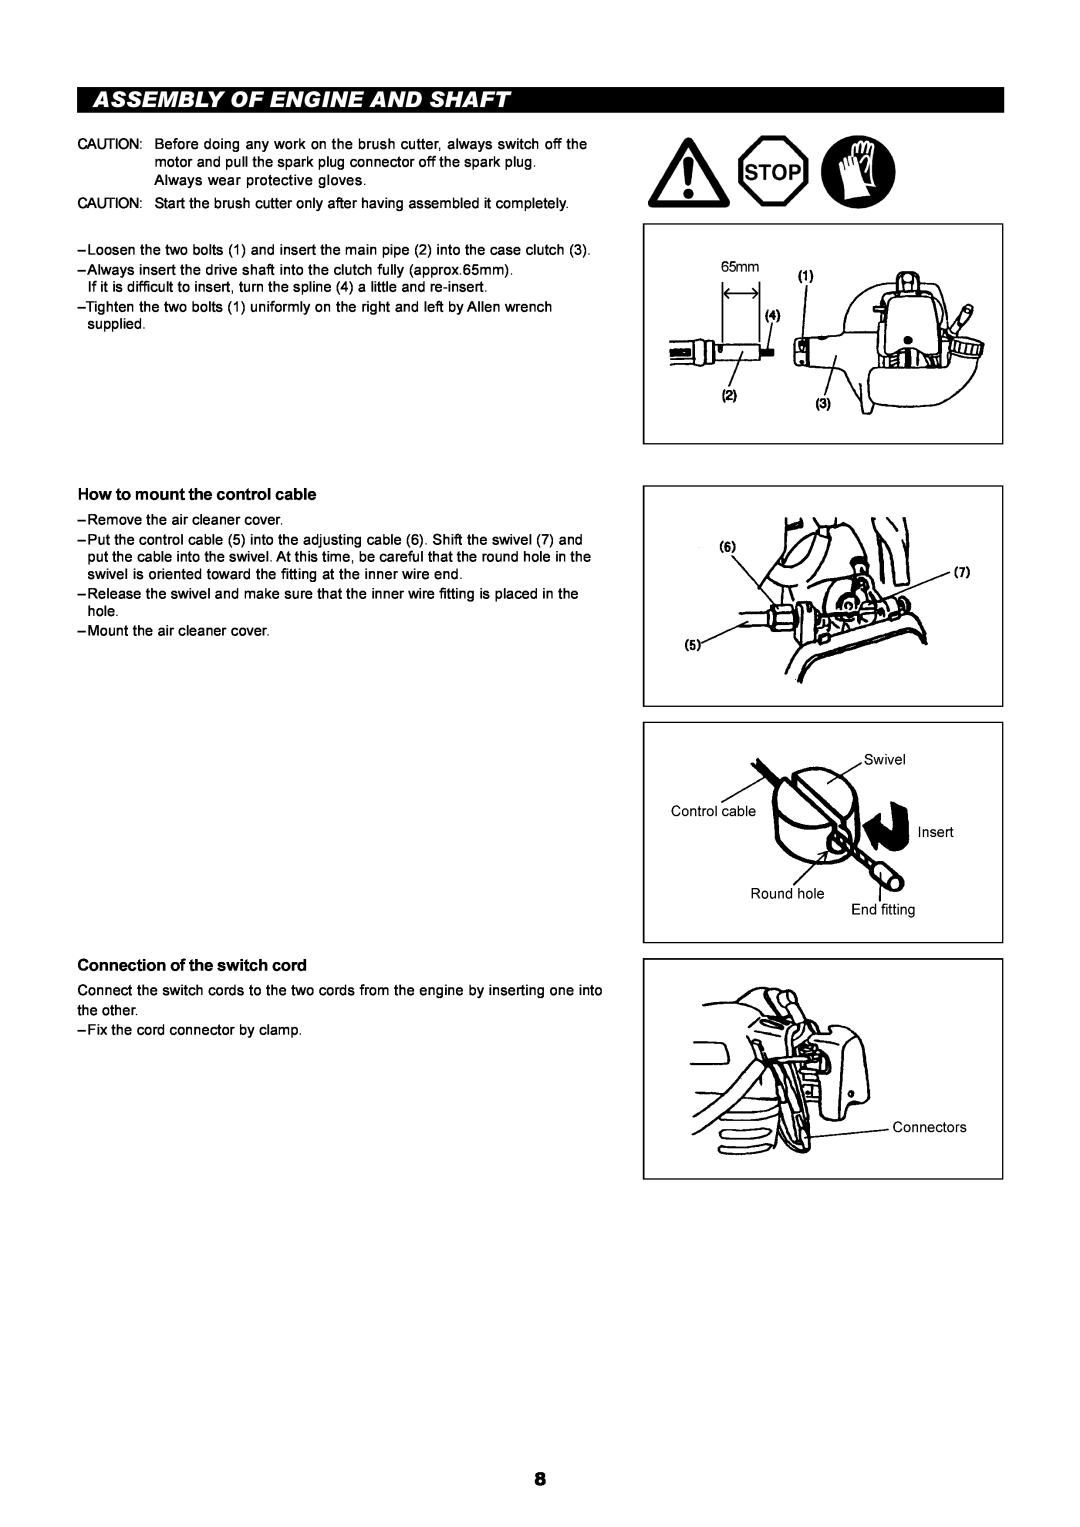 Dolmar PE-251 Assembly Of Engine And Shaft, How to mount the control cable, Connection of the switch cord 